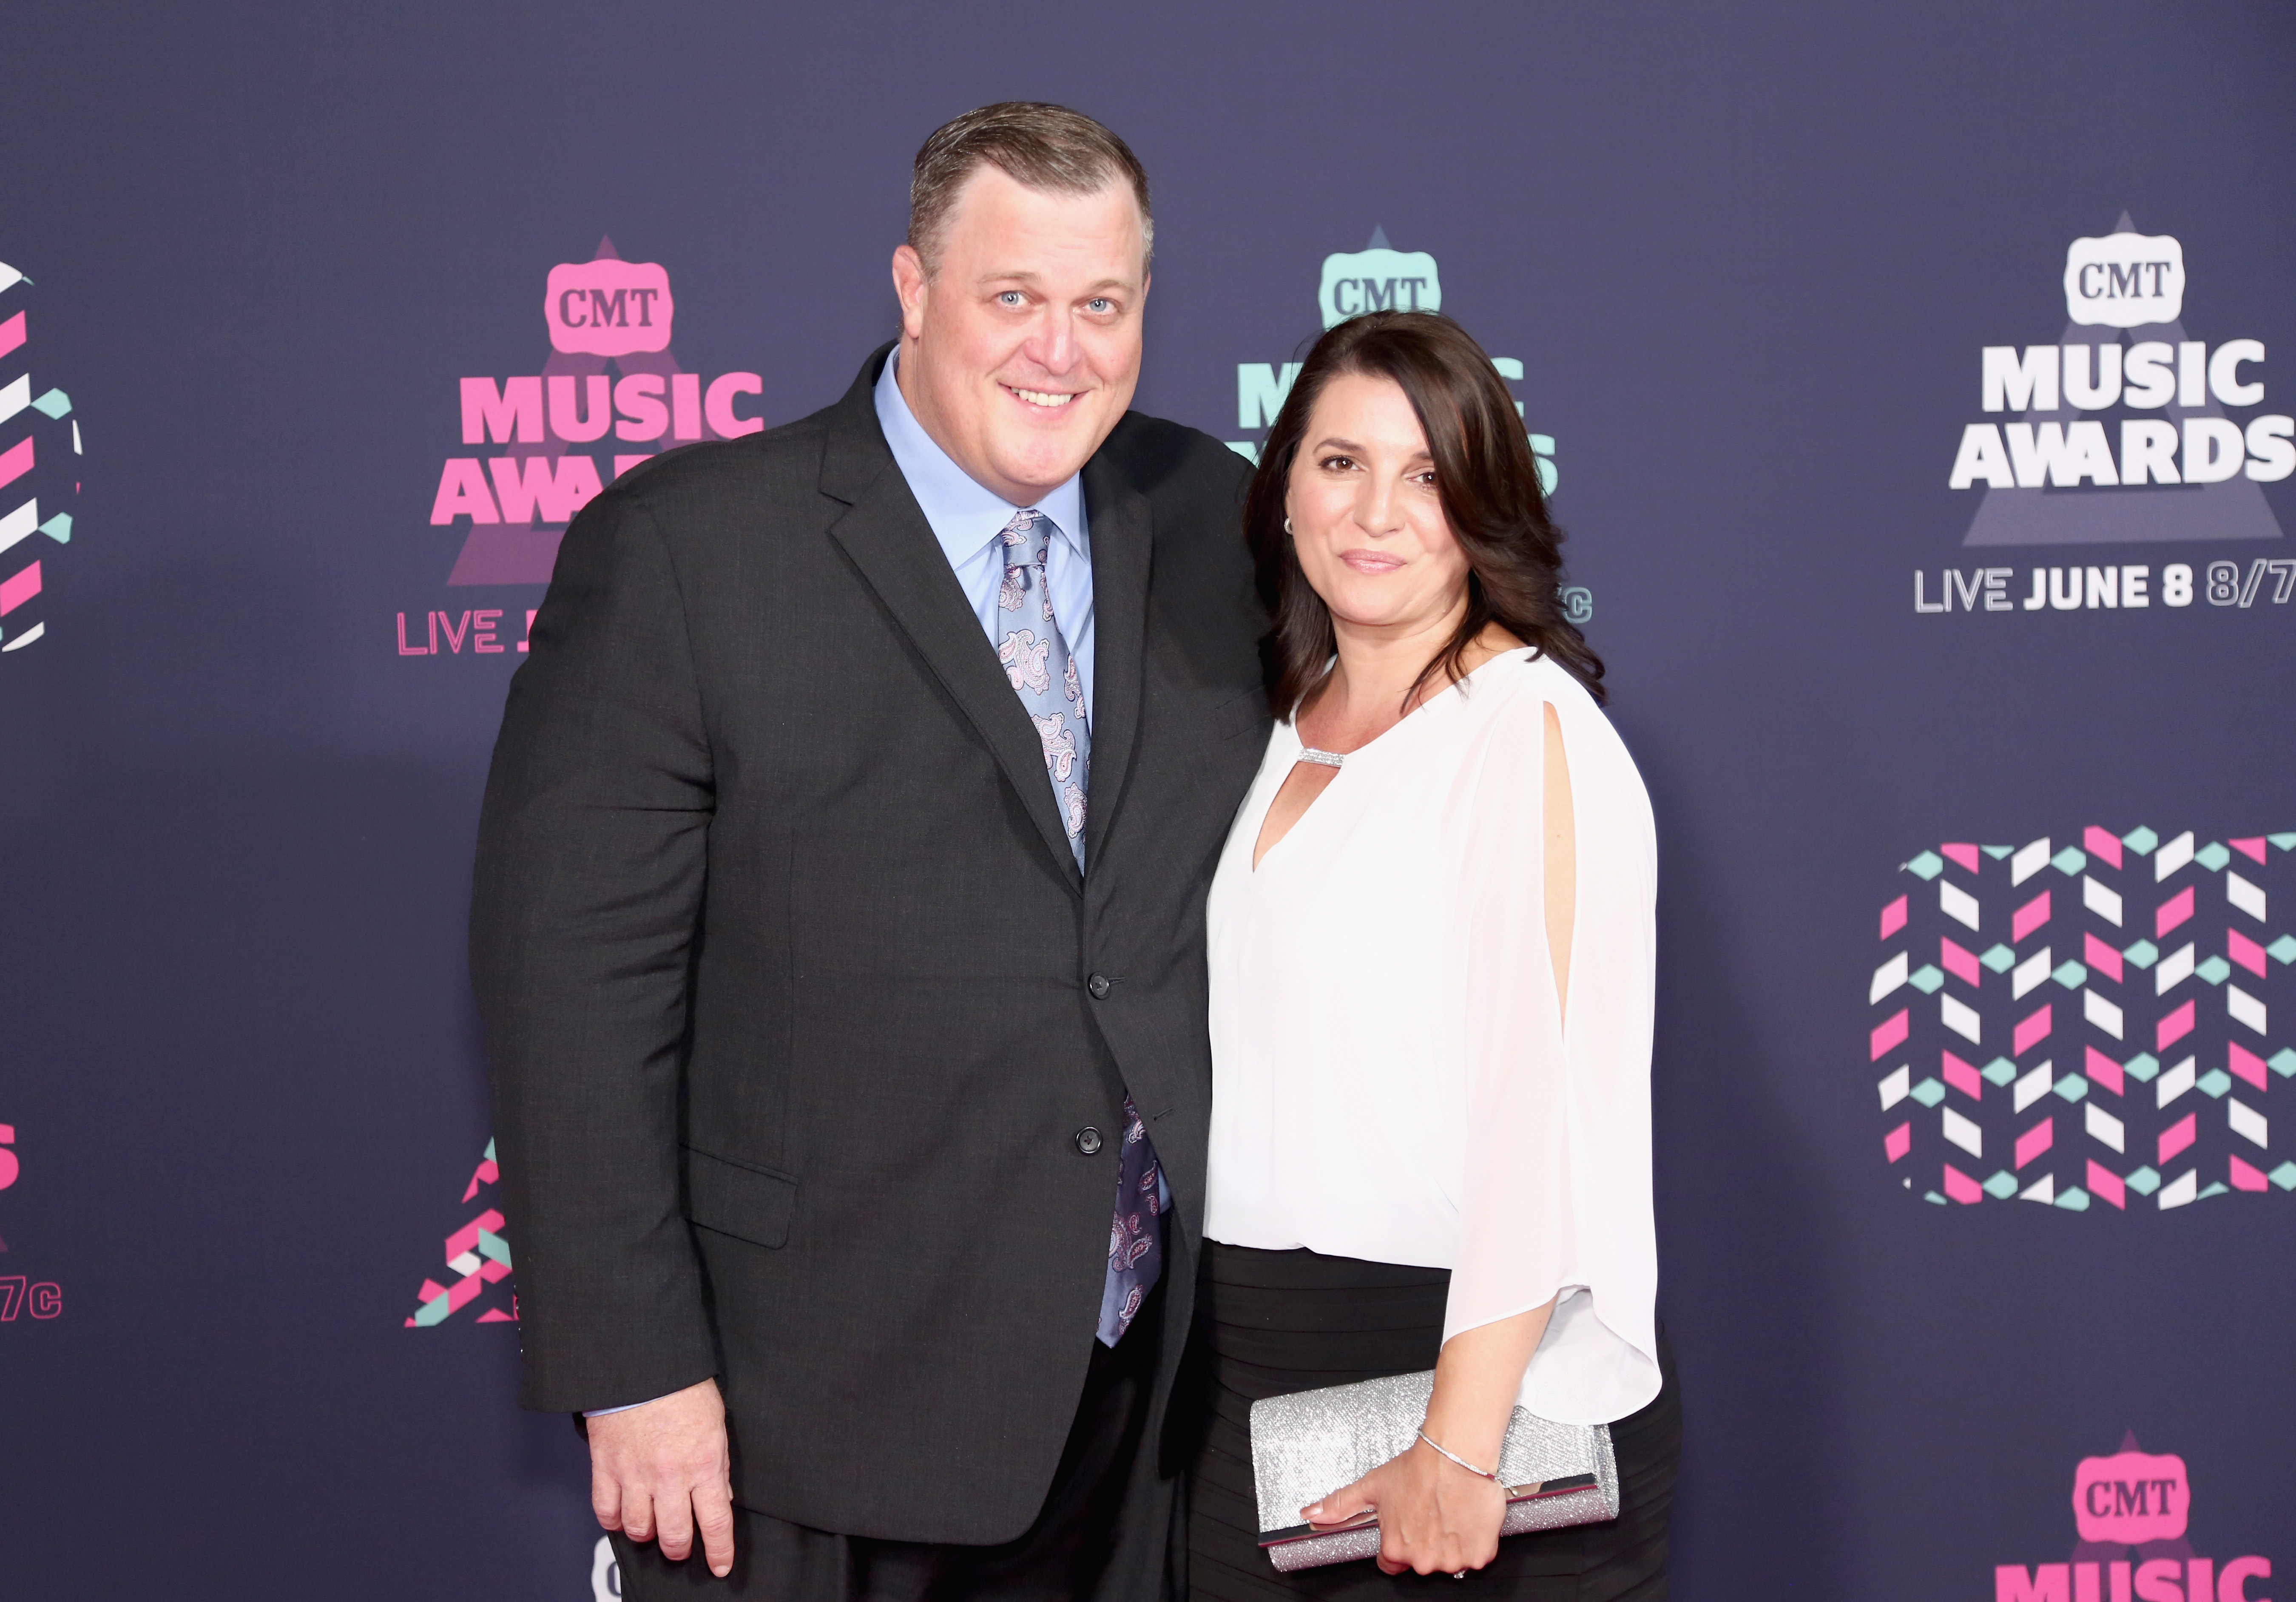 Billy Gardell and Patty Gardell attend the 2016 CMT Music awards at the Bridgestone Arena on June 8, 2016, in Nashville, Tennessee. | Source: Getty Images